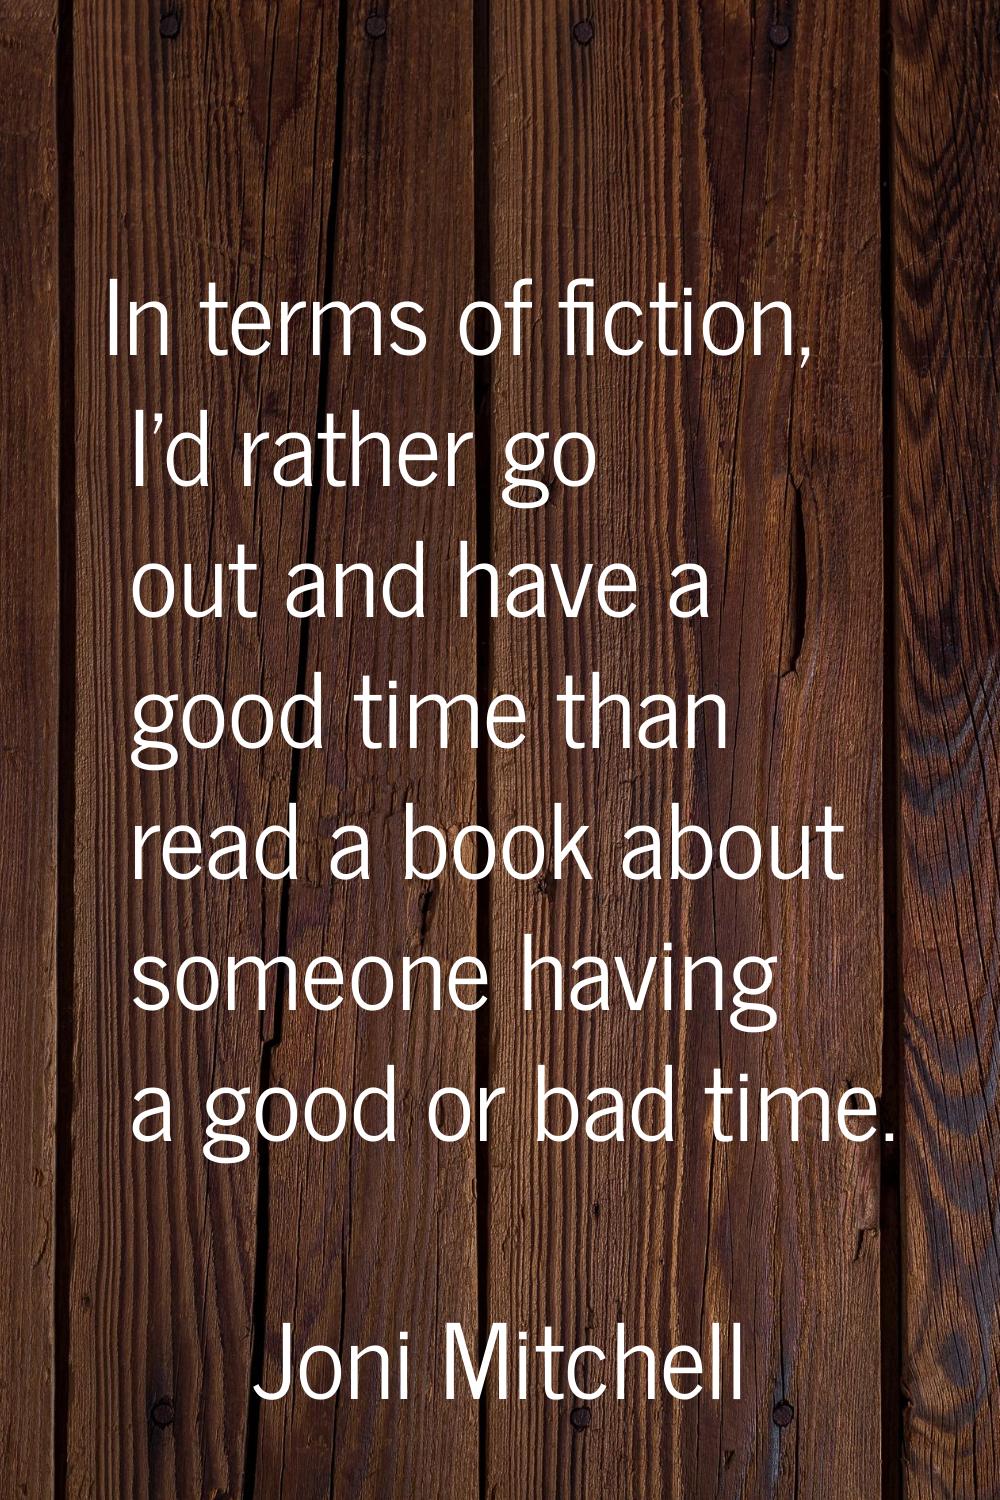 In terms of fiction, I'd rather go out and have a good time than read a book about someone having a